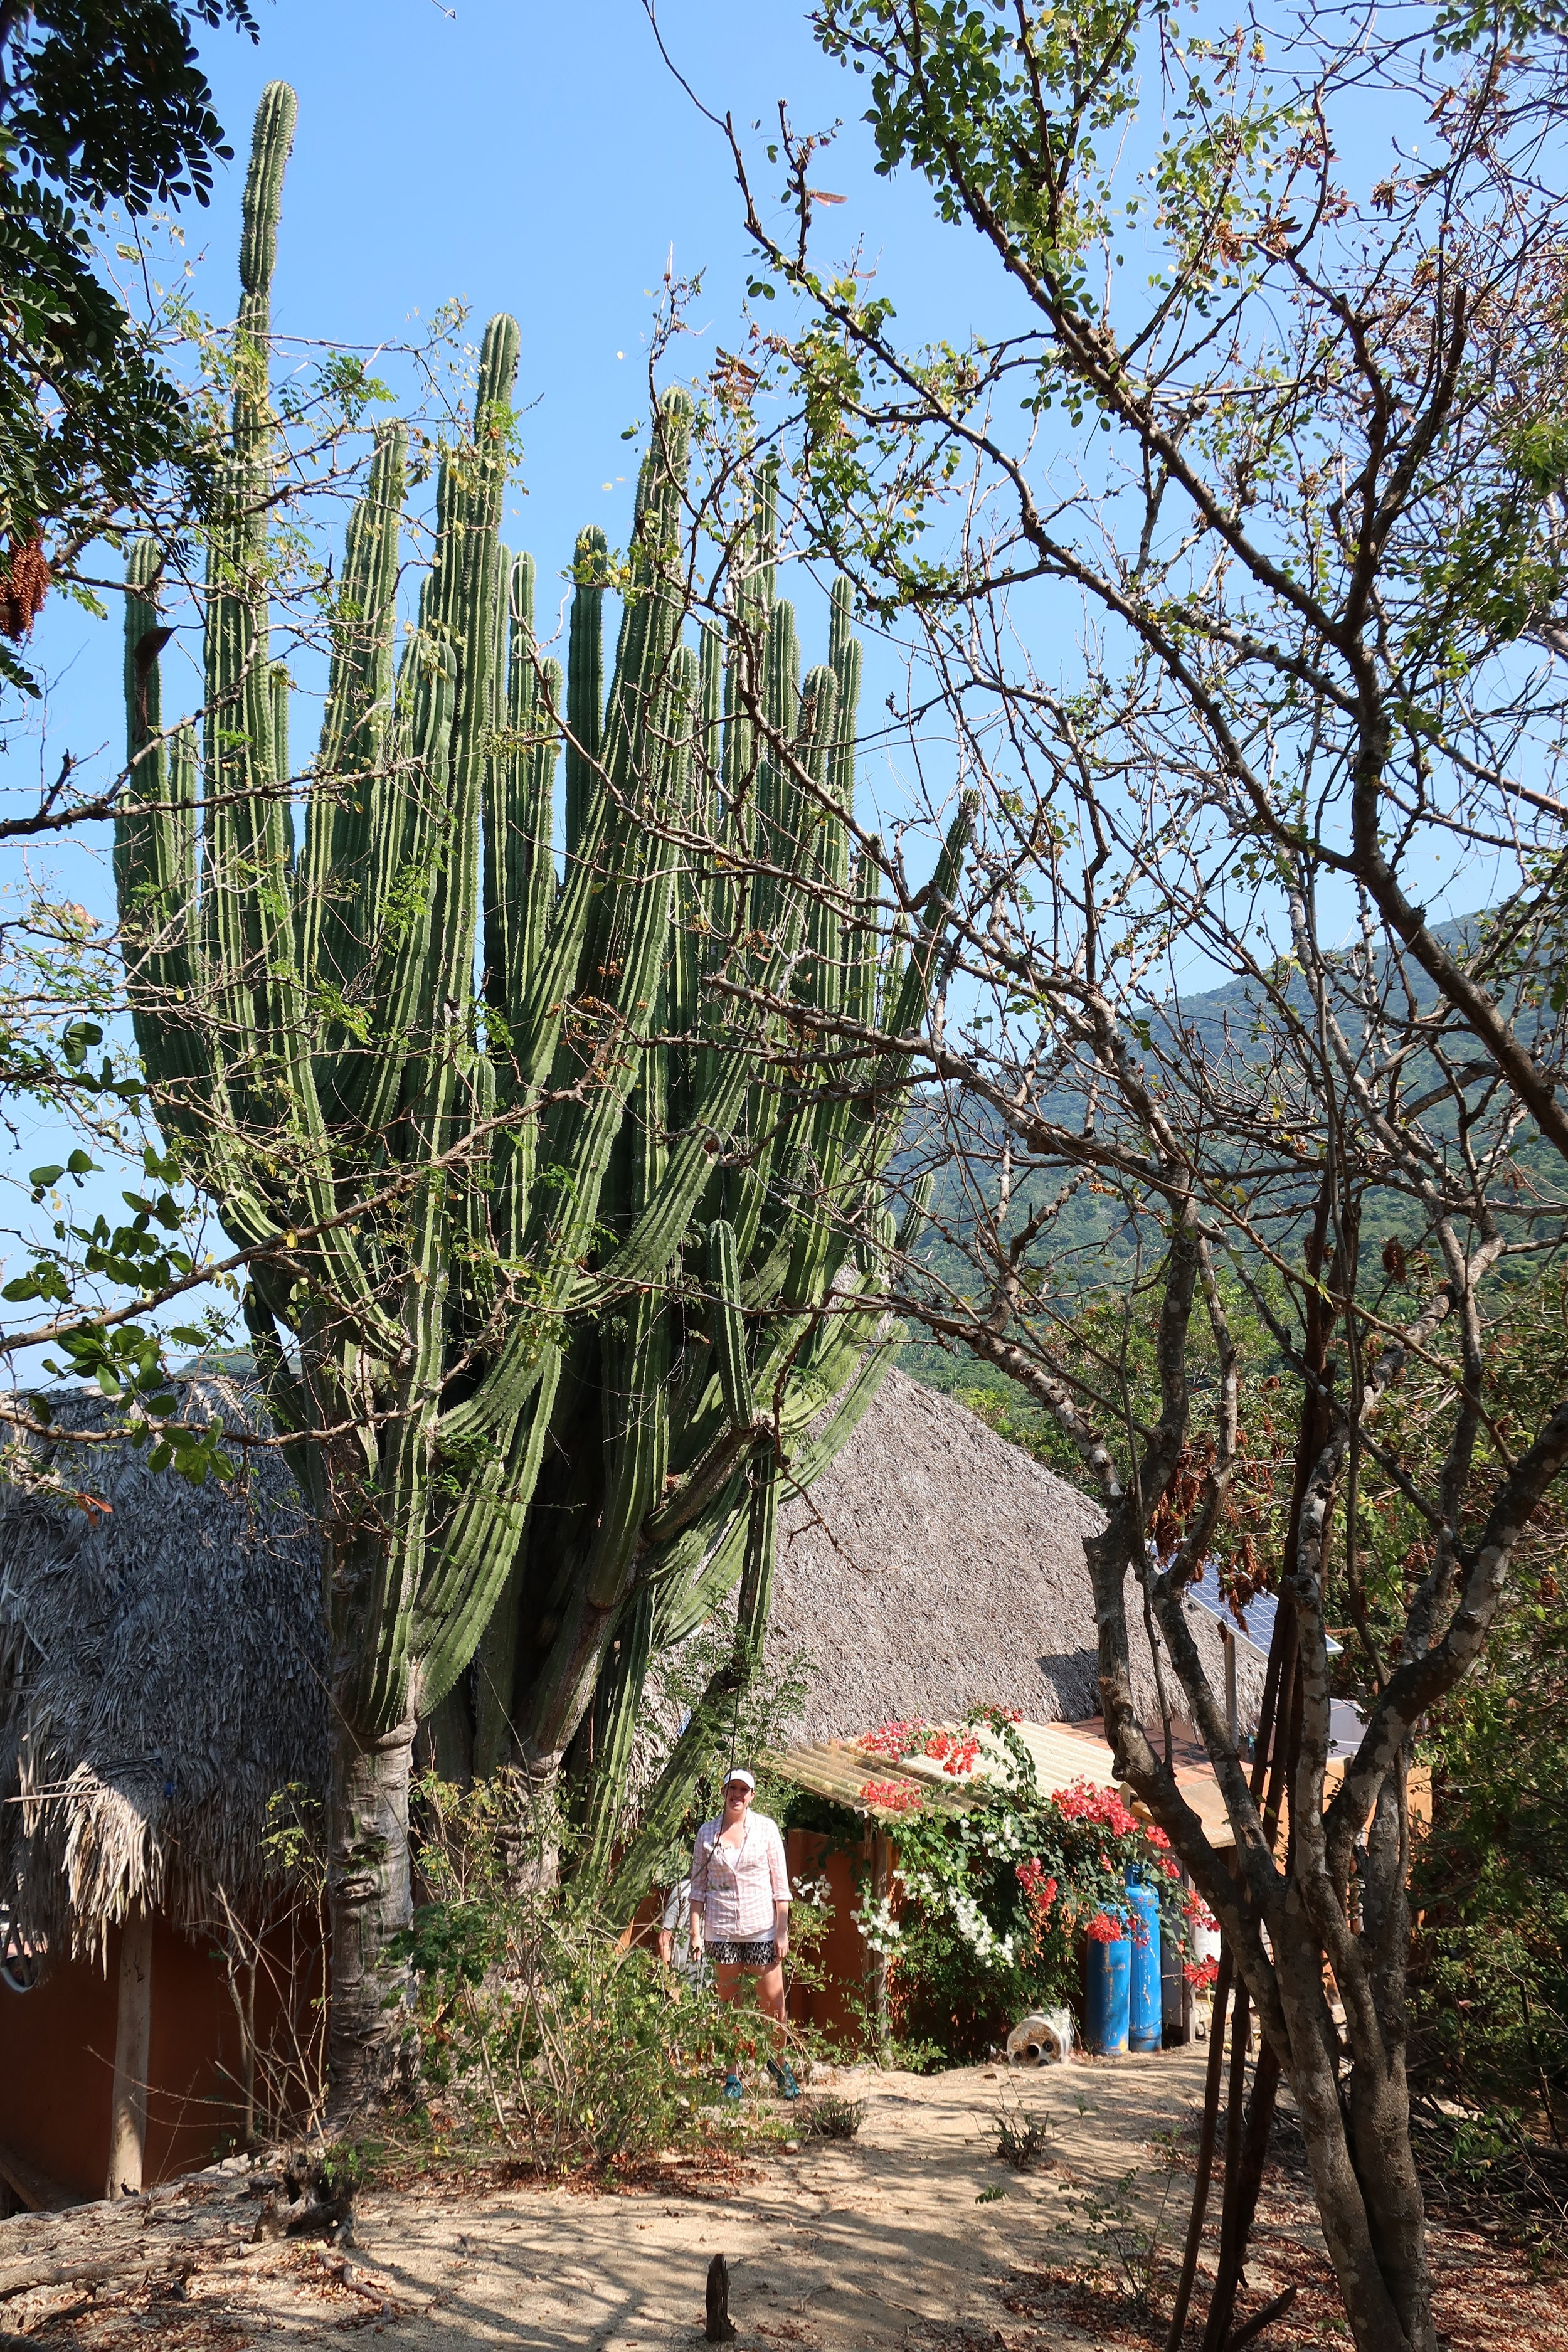 Casa Cactus is so-named for a specimen cactus that juts out from the top of the palapa, as viewed from the ocean